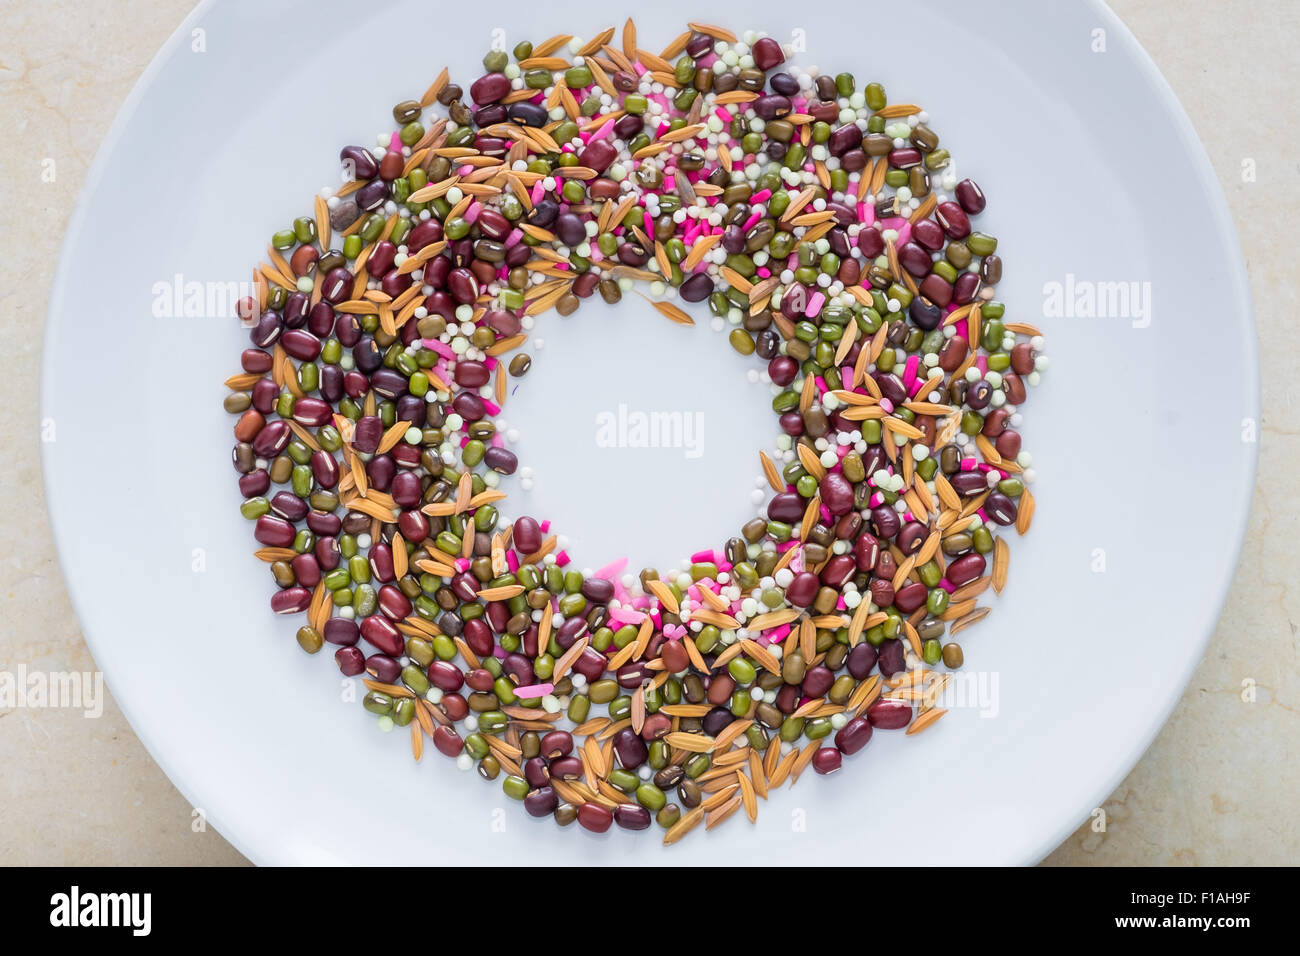 Mix of seeds (bean grain paddy) put on the white plate. Stock Photo